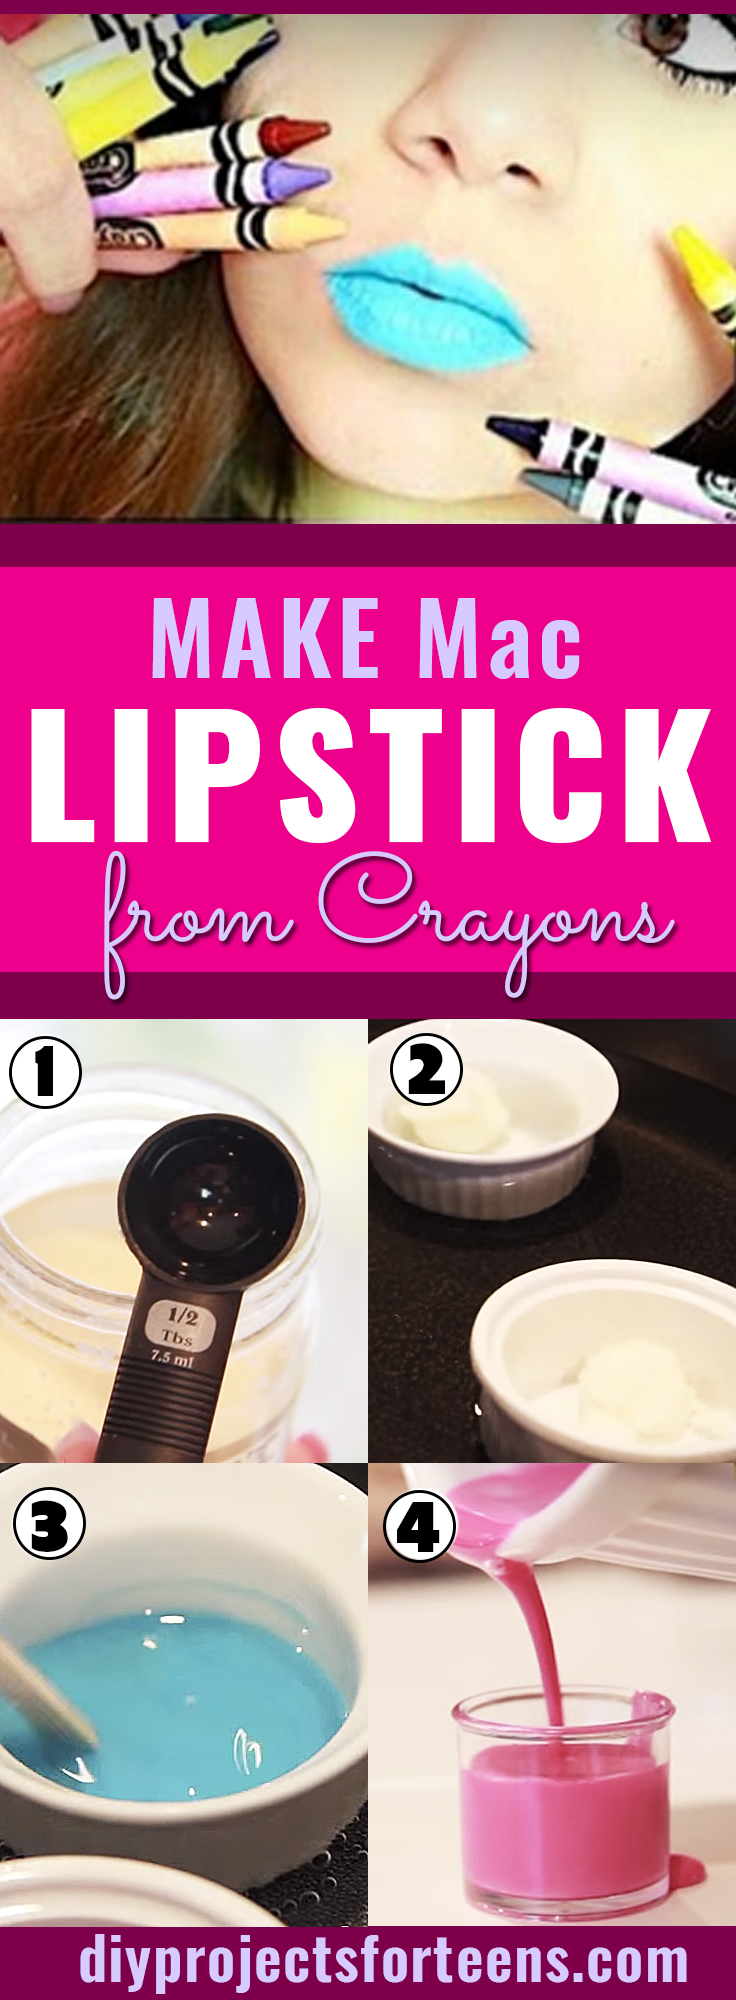 DIY Mac Lipstick With Crayons - DIY Beauty Tutorial and Instructions for How To Make Mac Lipstick With Crayons